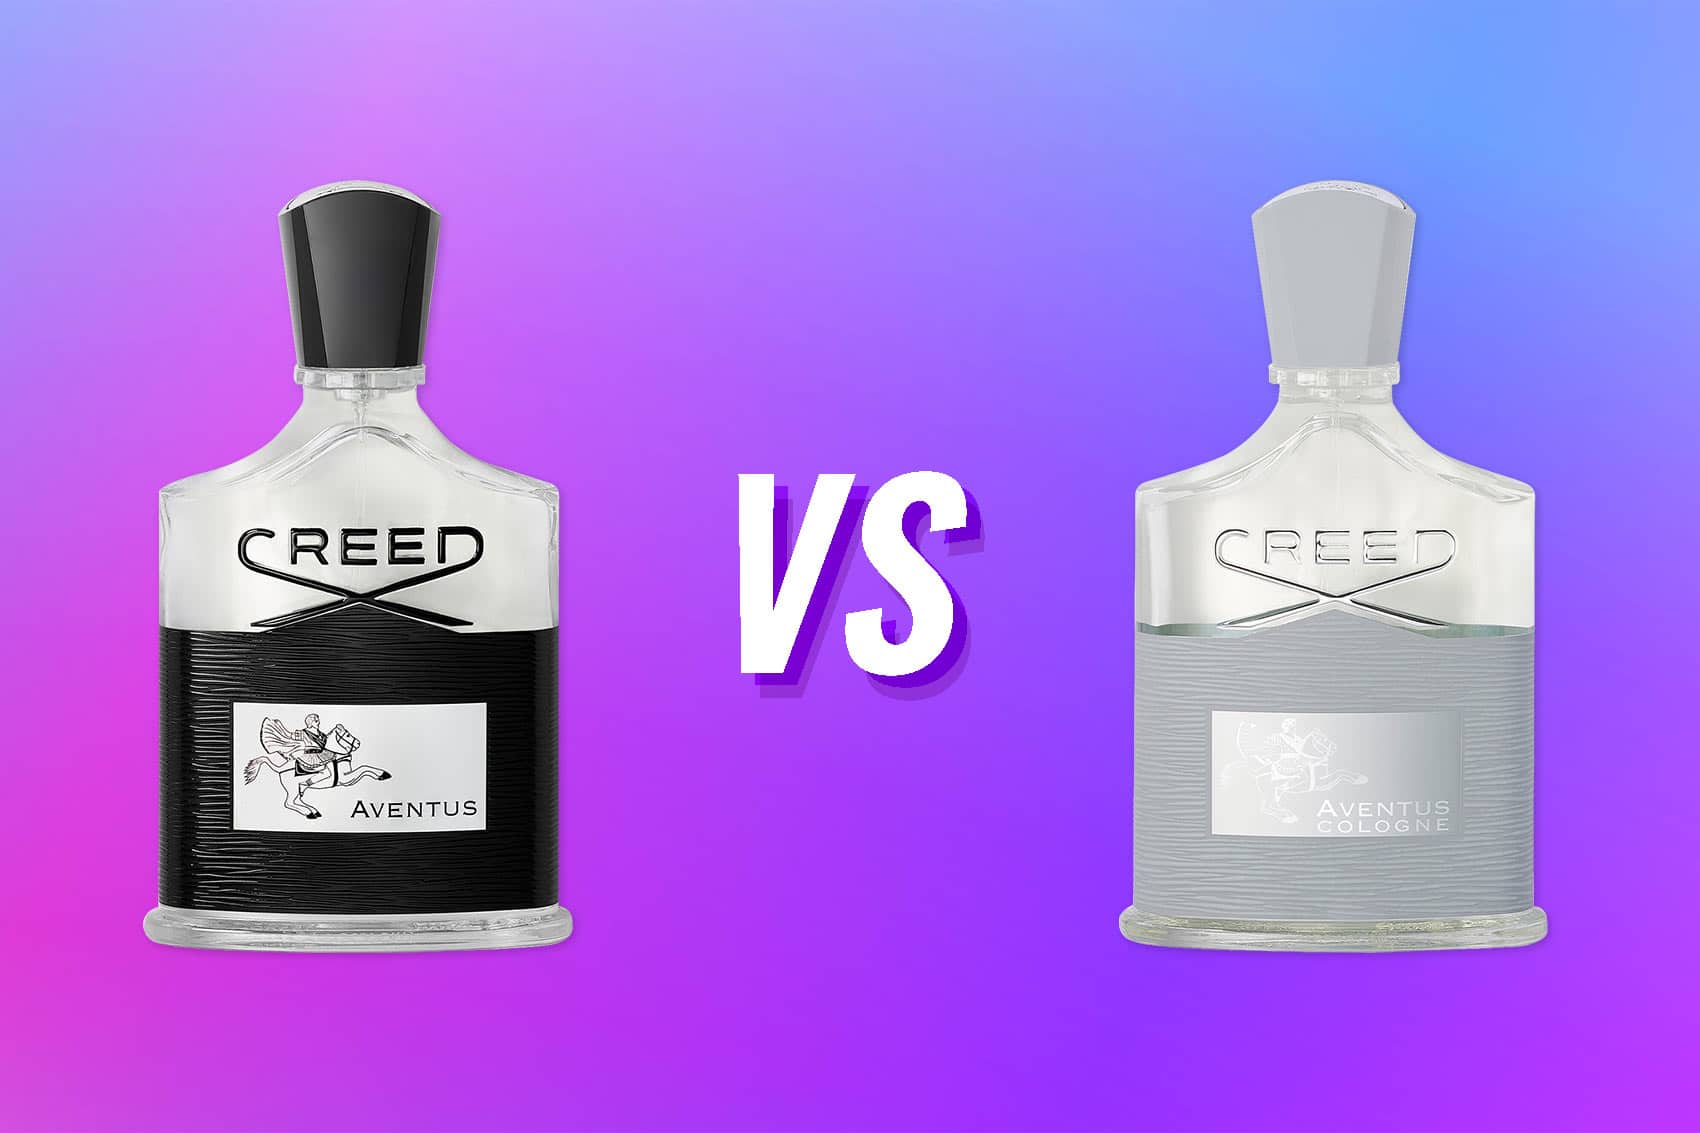 Creed Aventus Vs. Creed Aventus Cologne 1